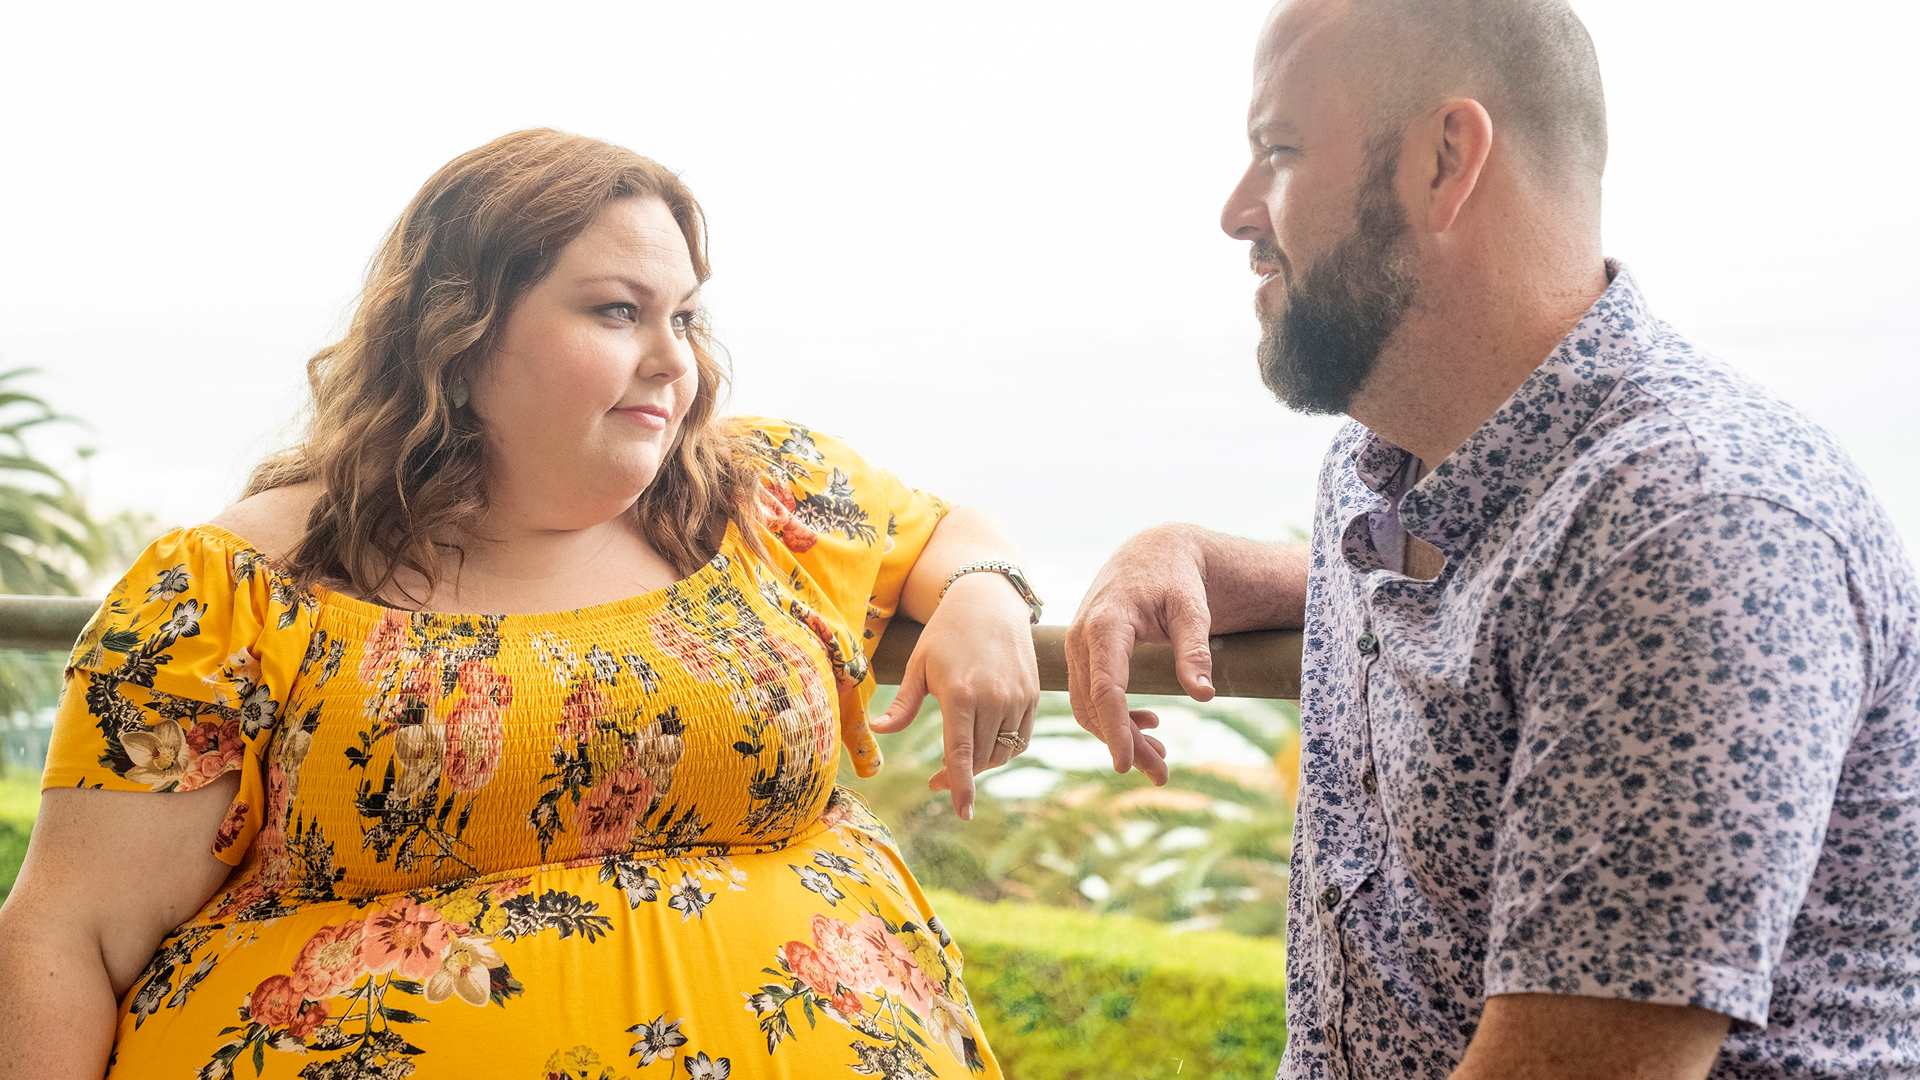 Chrissy Metz as Kate and Chris Sullivan as Toby having a serious discussion about their future in ‘This Is Us’ Season 5 Episode 16